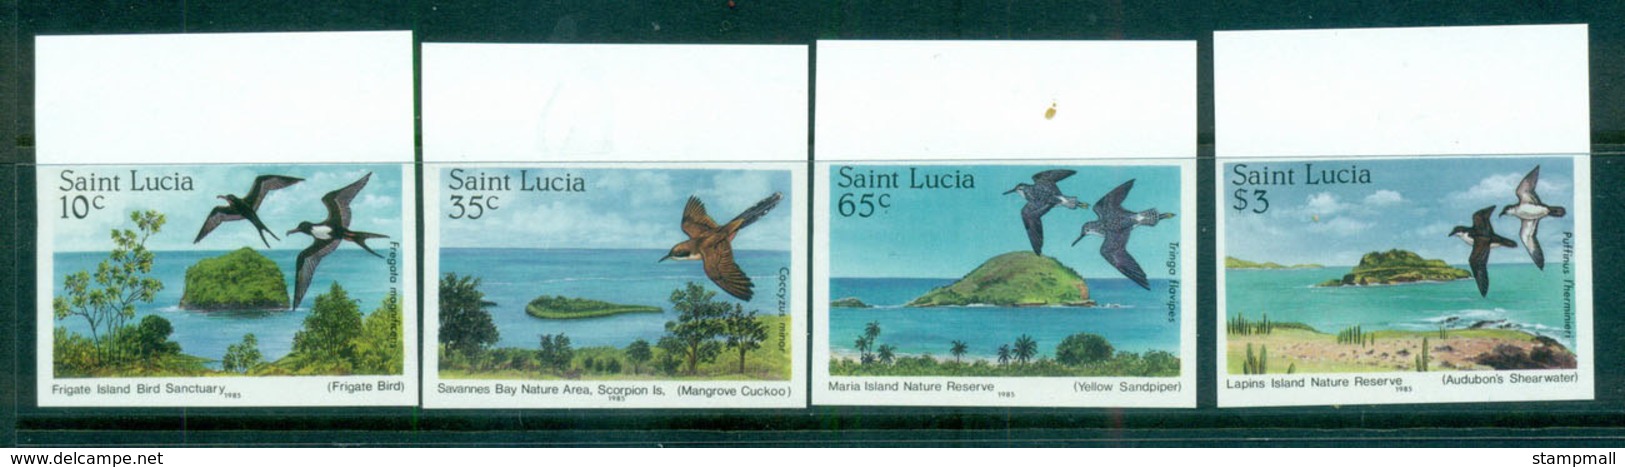 St Lucia 1985 Nature Reserves, Birds In Habitats IMPERF MUH Lot68642 - St.Lucia (1979-...)